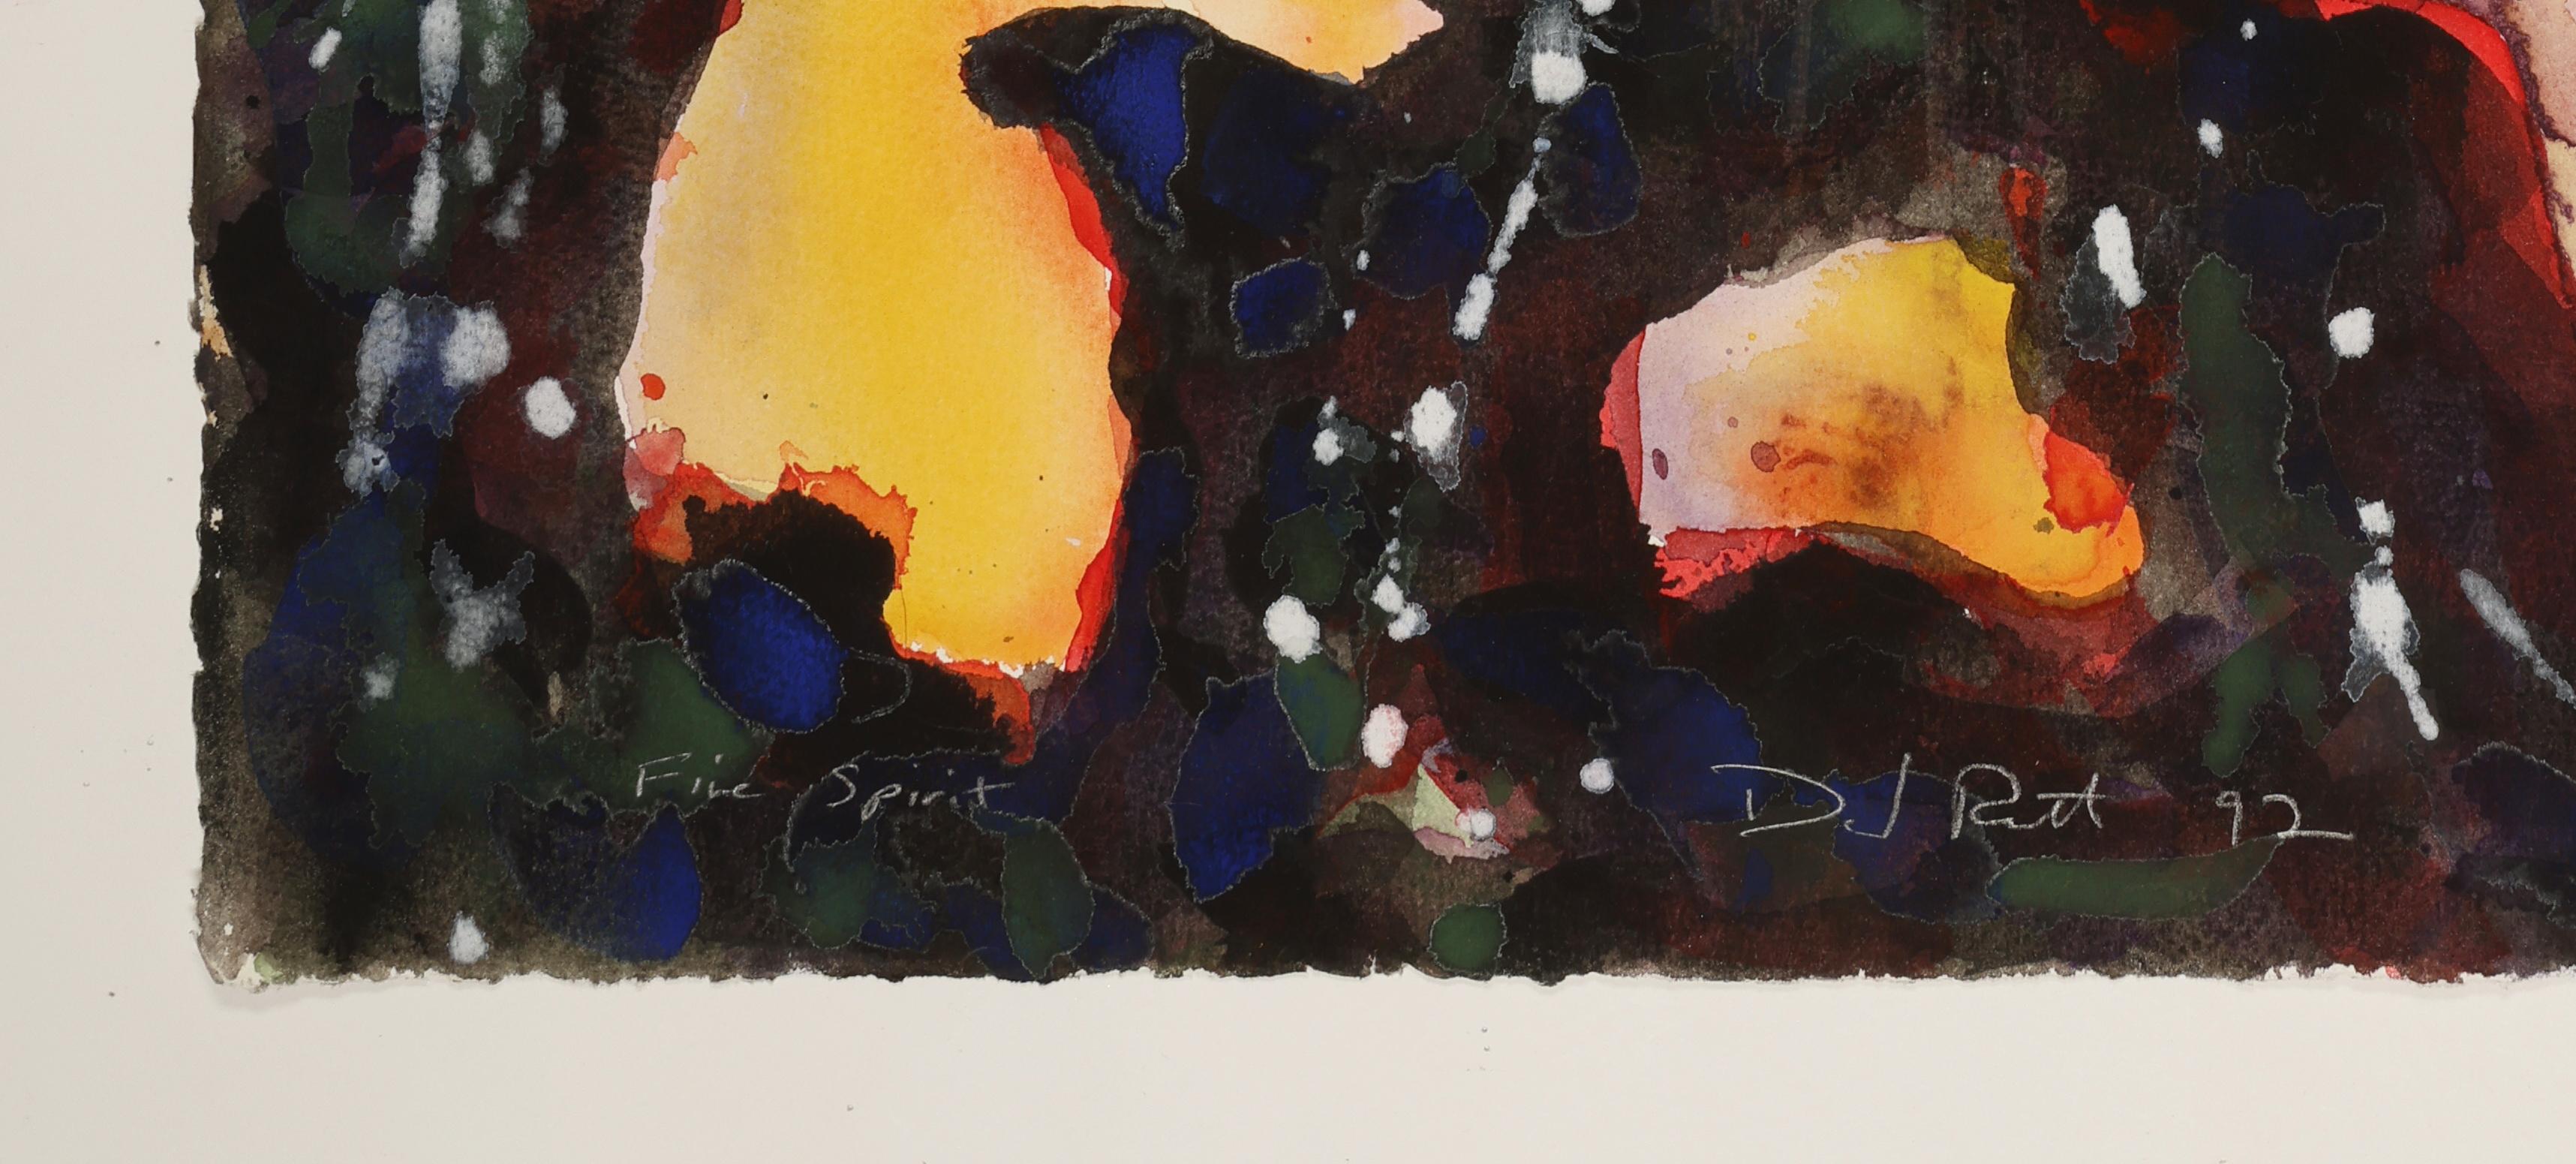 Abstract Watercolor Painting, 'Fire Spirit', 1992 by David Ruth For Sale 2